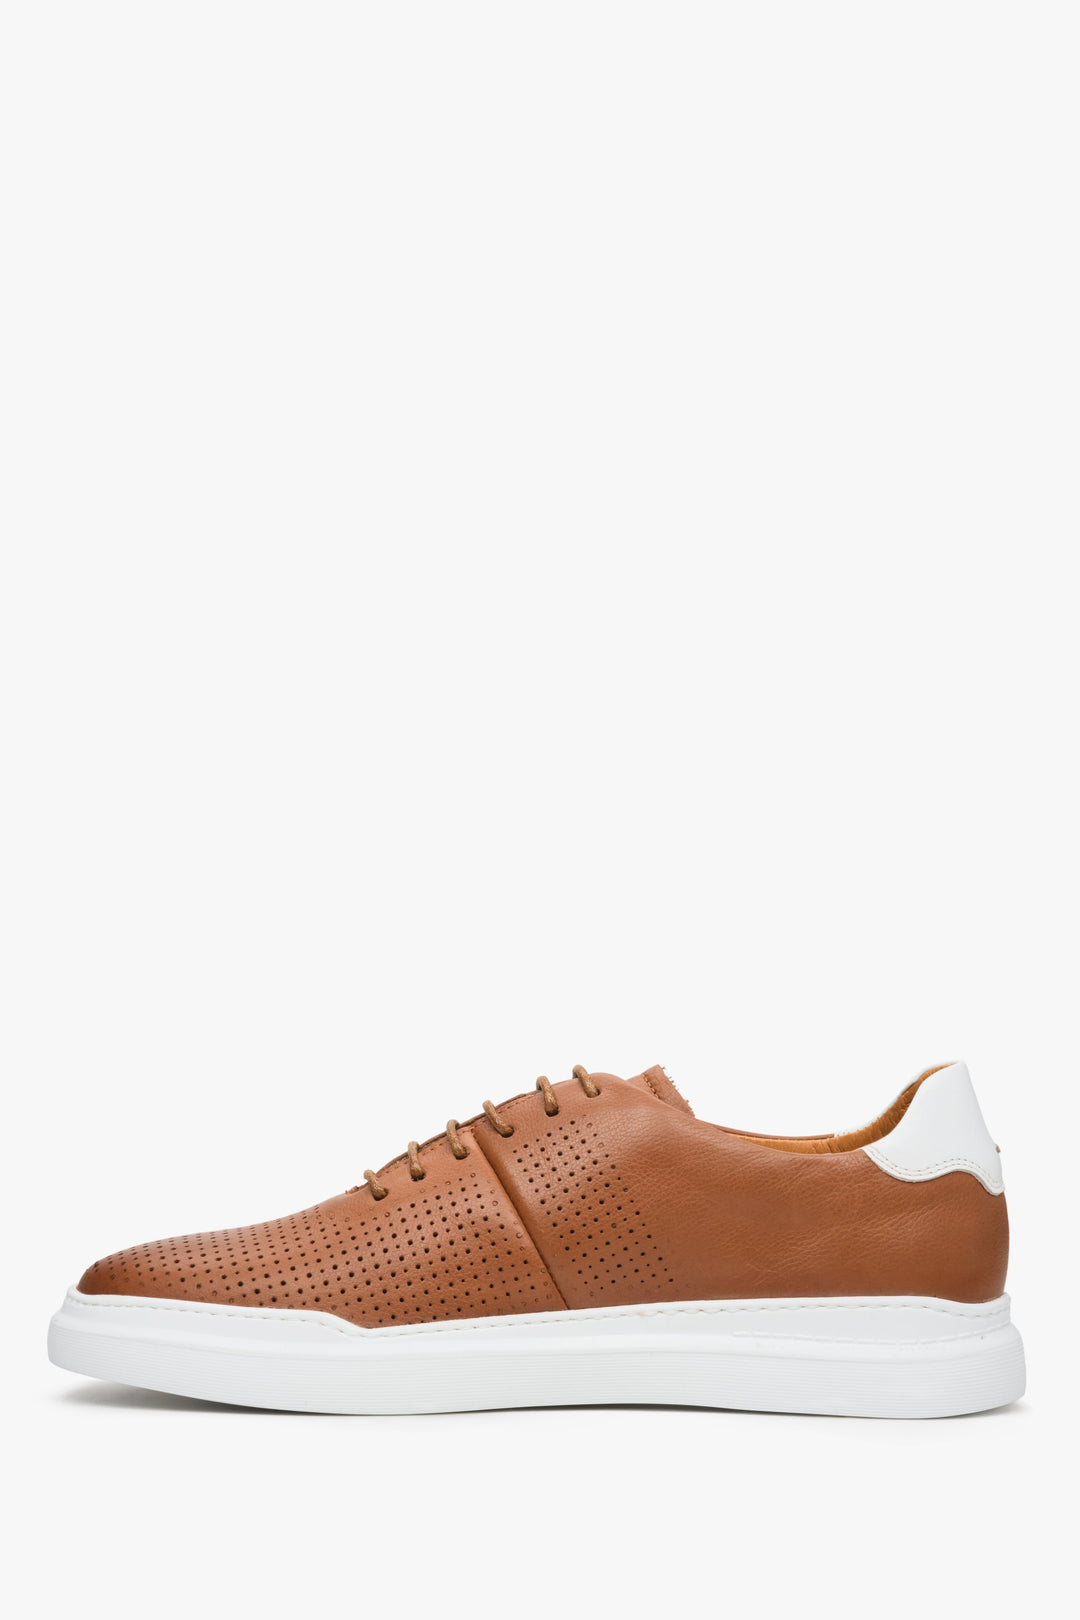 Men's brown natural leather sneakers for summer by Estro - footwear profile.